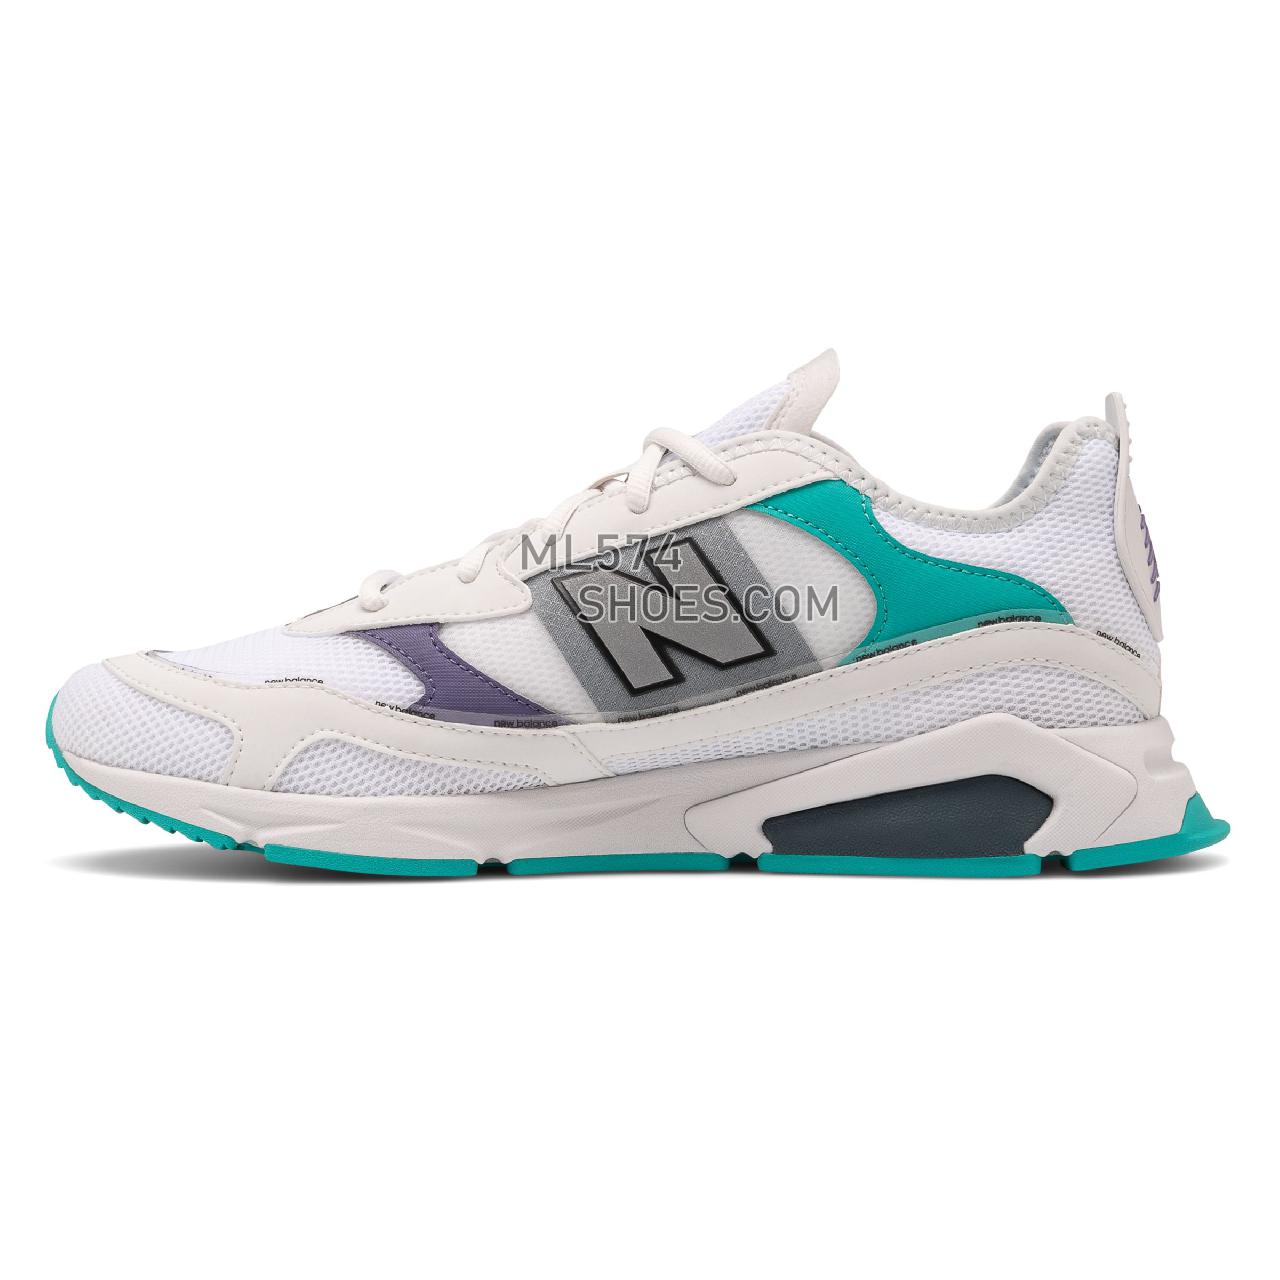 New Balance X-Racer - Men's Sport Style Sneakers - White with Violet Fluorite and Light Reef - MSXRCHLC